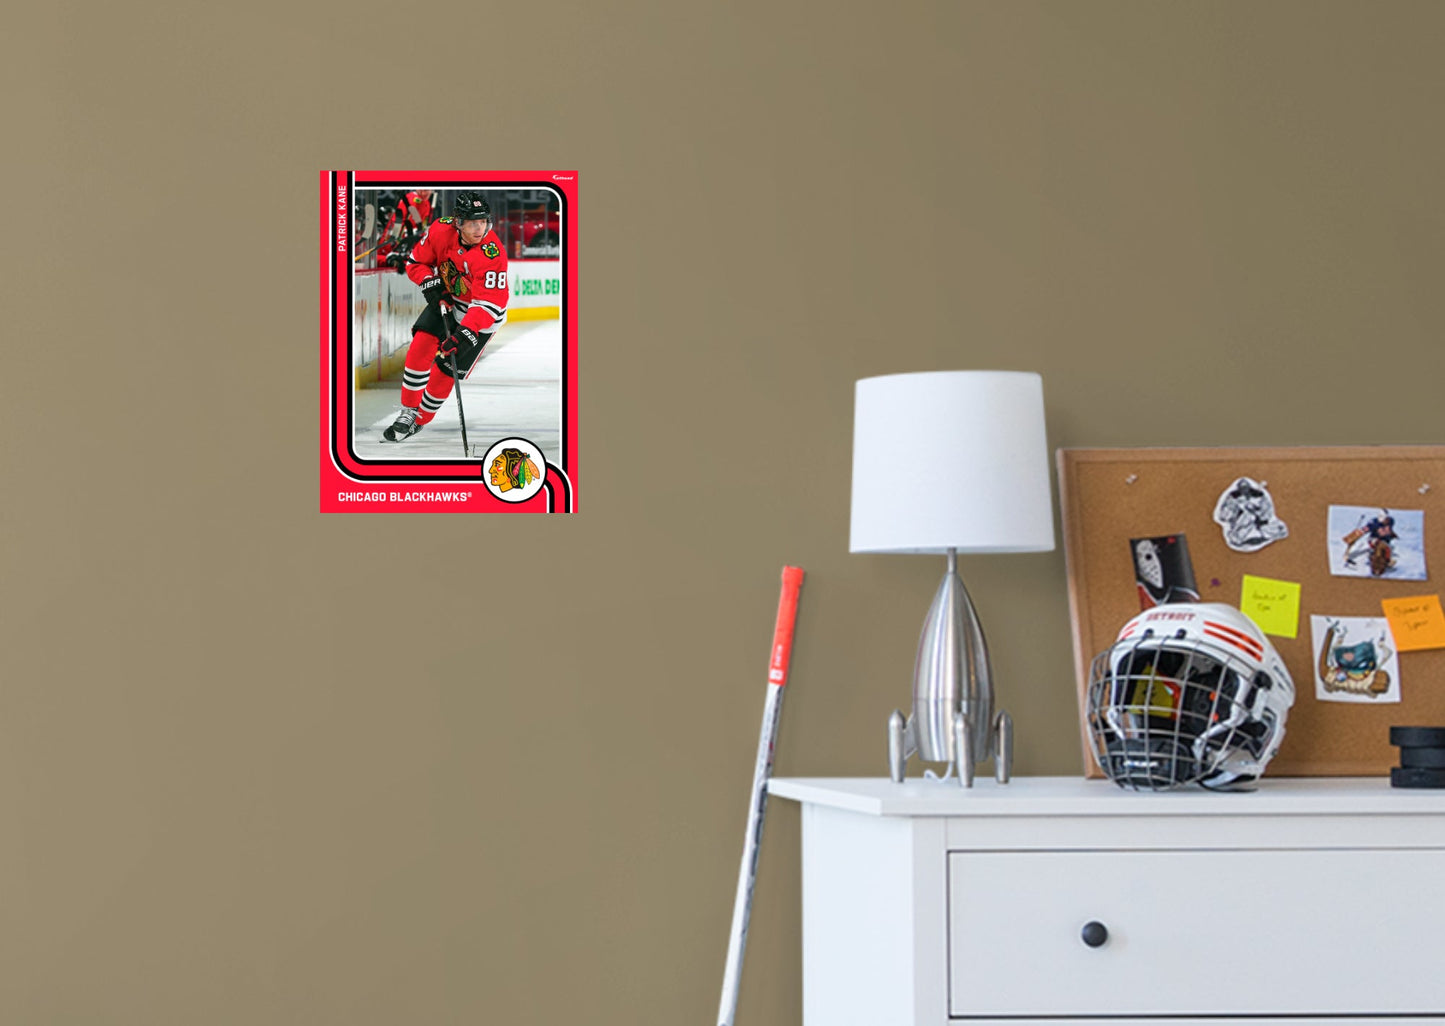 Chicago Blackhawks: Patrick Kane Poster - Officially Licensed NHL Removable Adhesive Decal